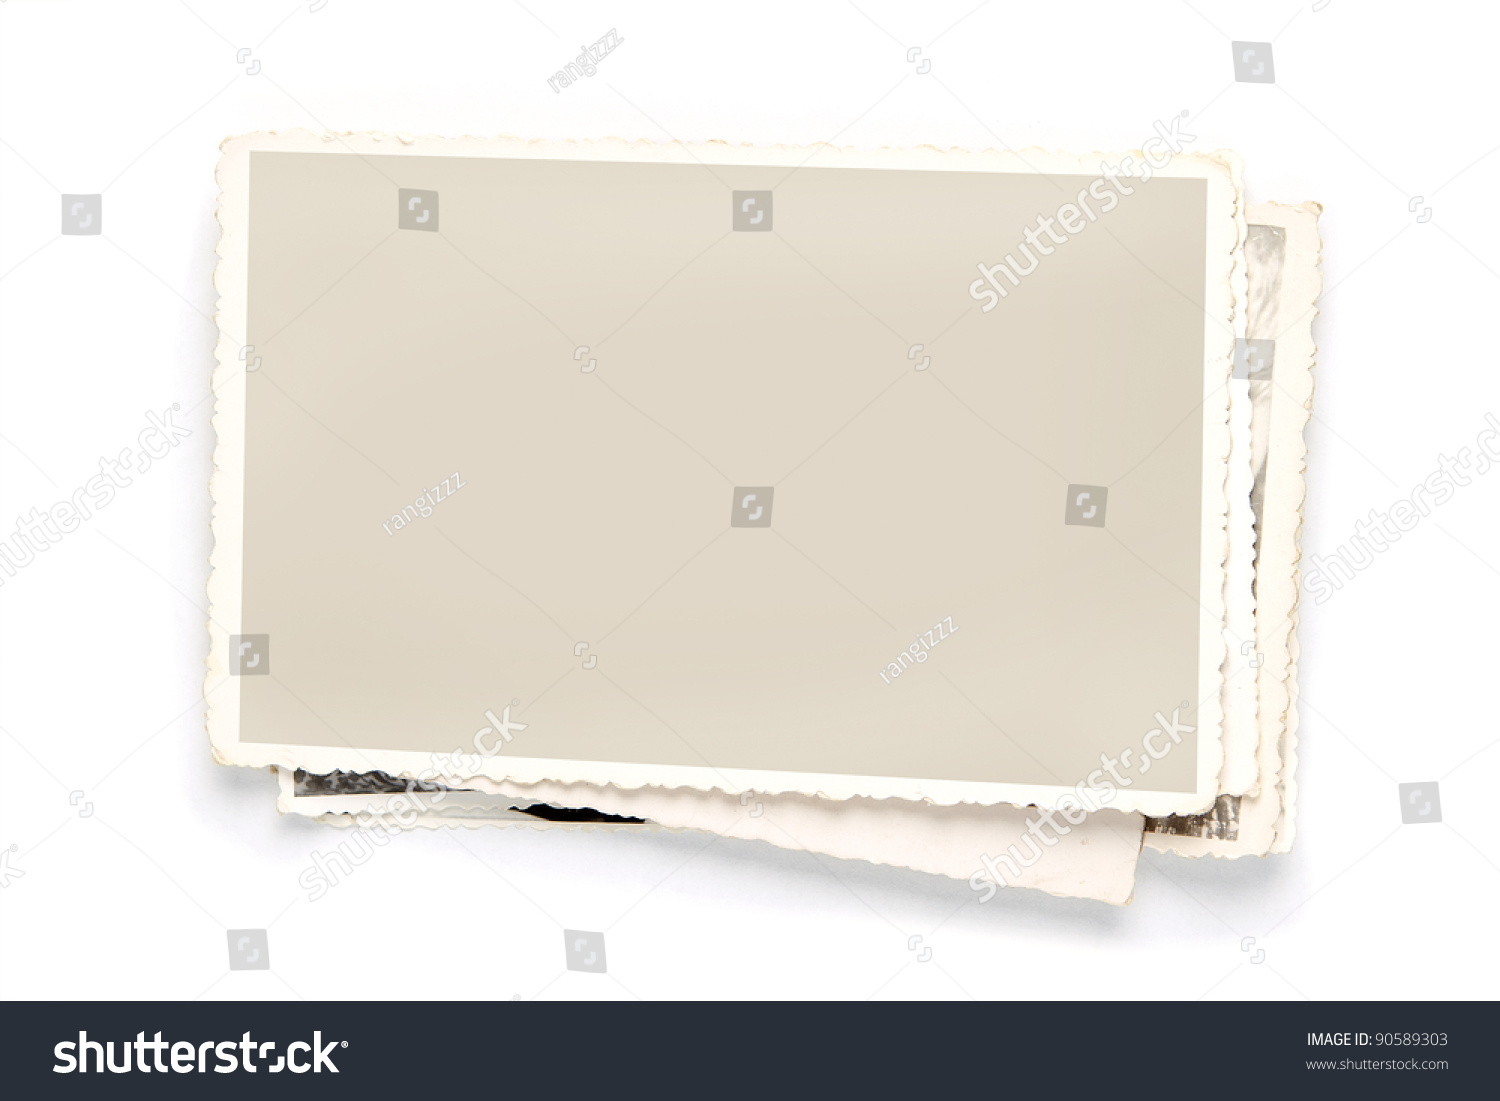 Stack of old photos with clipping path for the inside #90589303